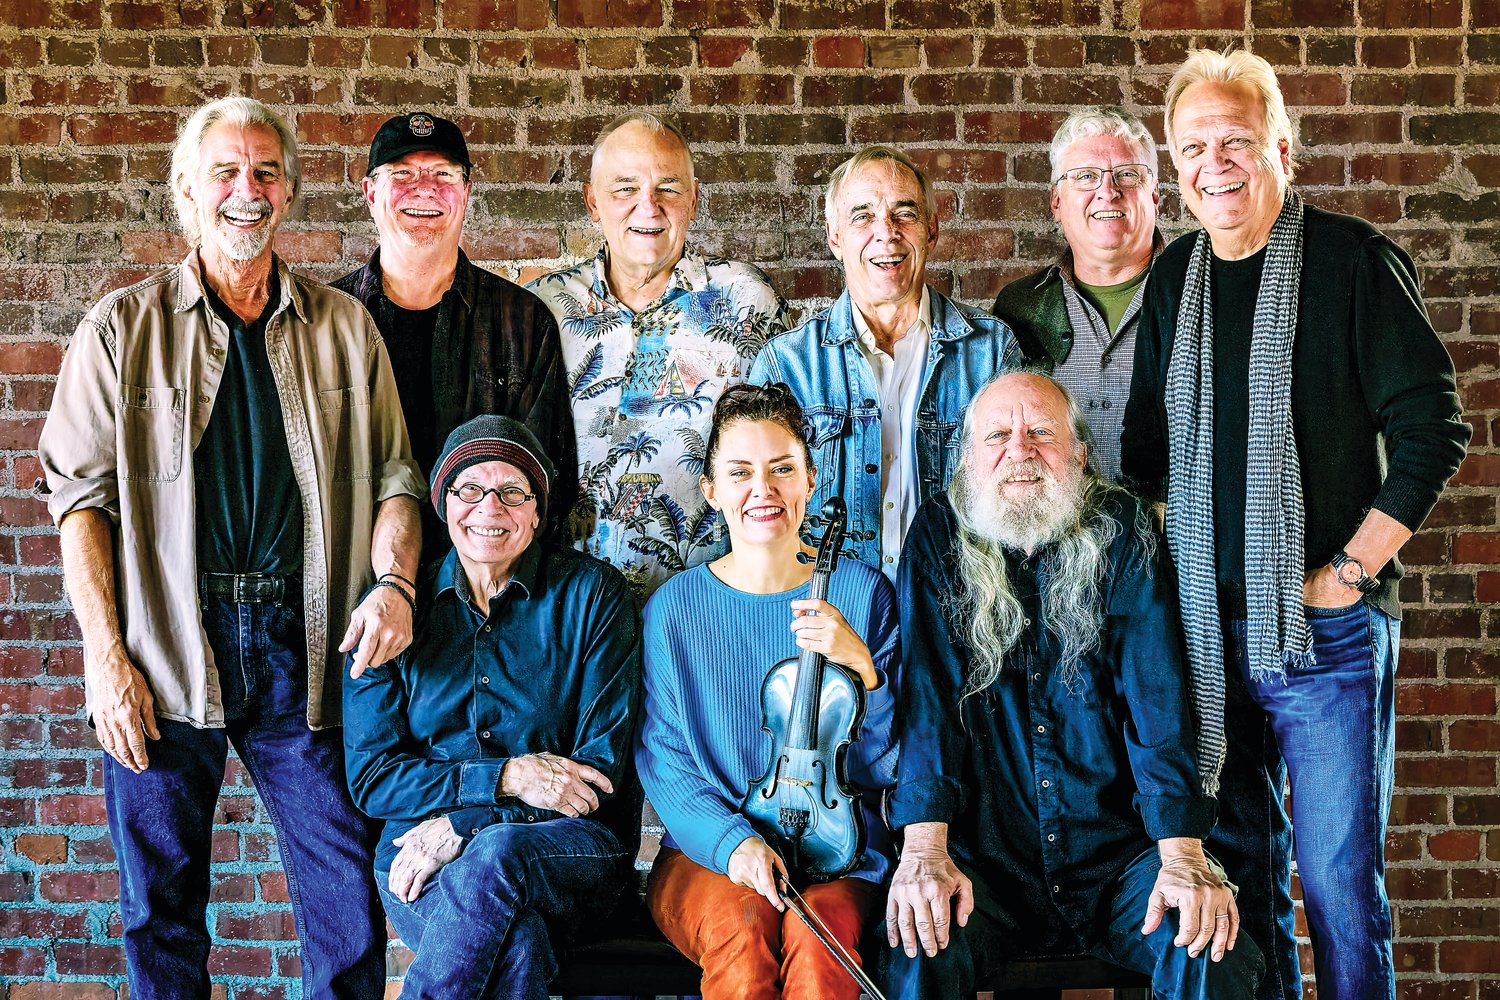 The current incarnation of The Ozark Mountain Daredevils includes (from left, front) Ruell Chappell, Molly Healey, Supe Granda, (back) Ron Gremp, Dave Painter, Bill Jones, Nick Sibley, Kelly Brown and John Dillon.